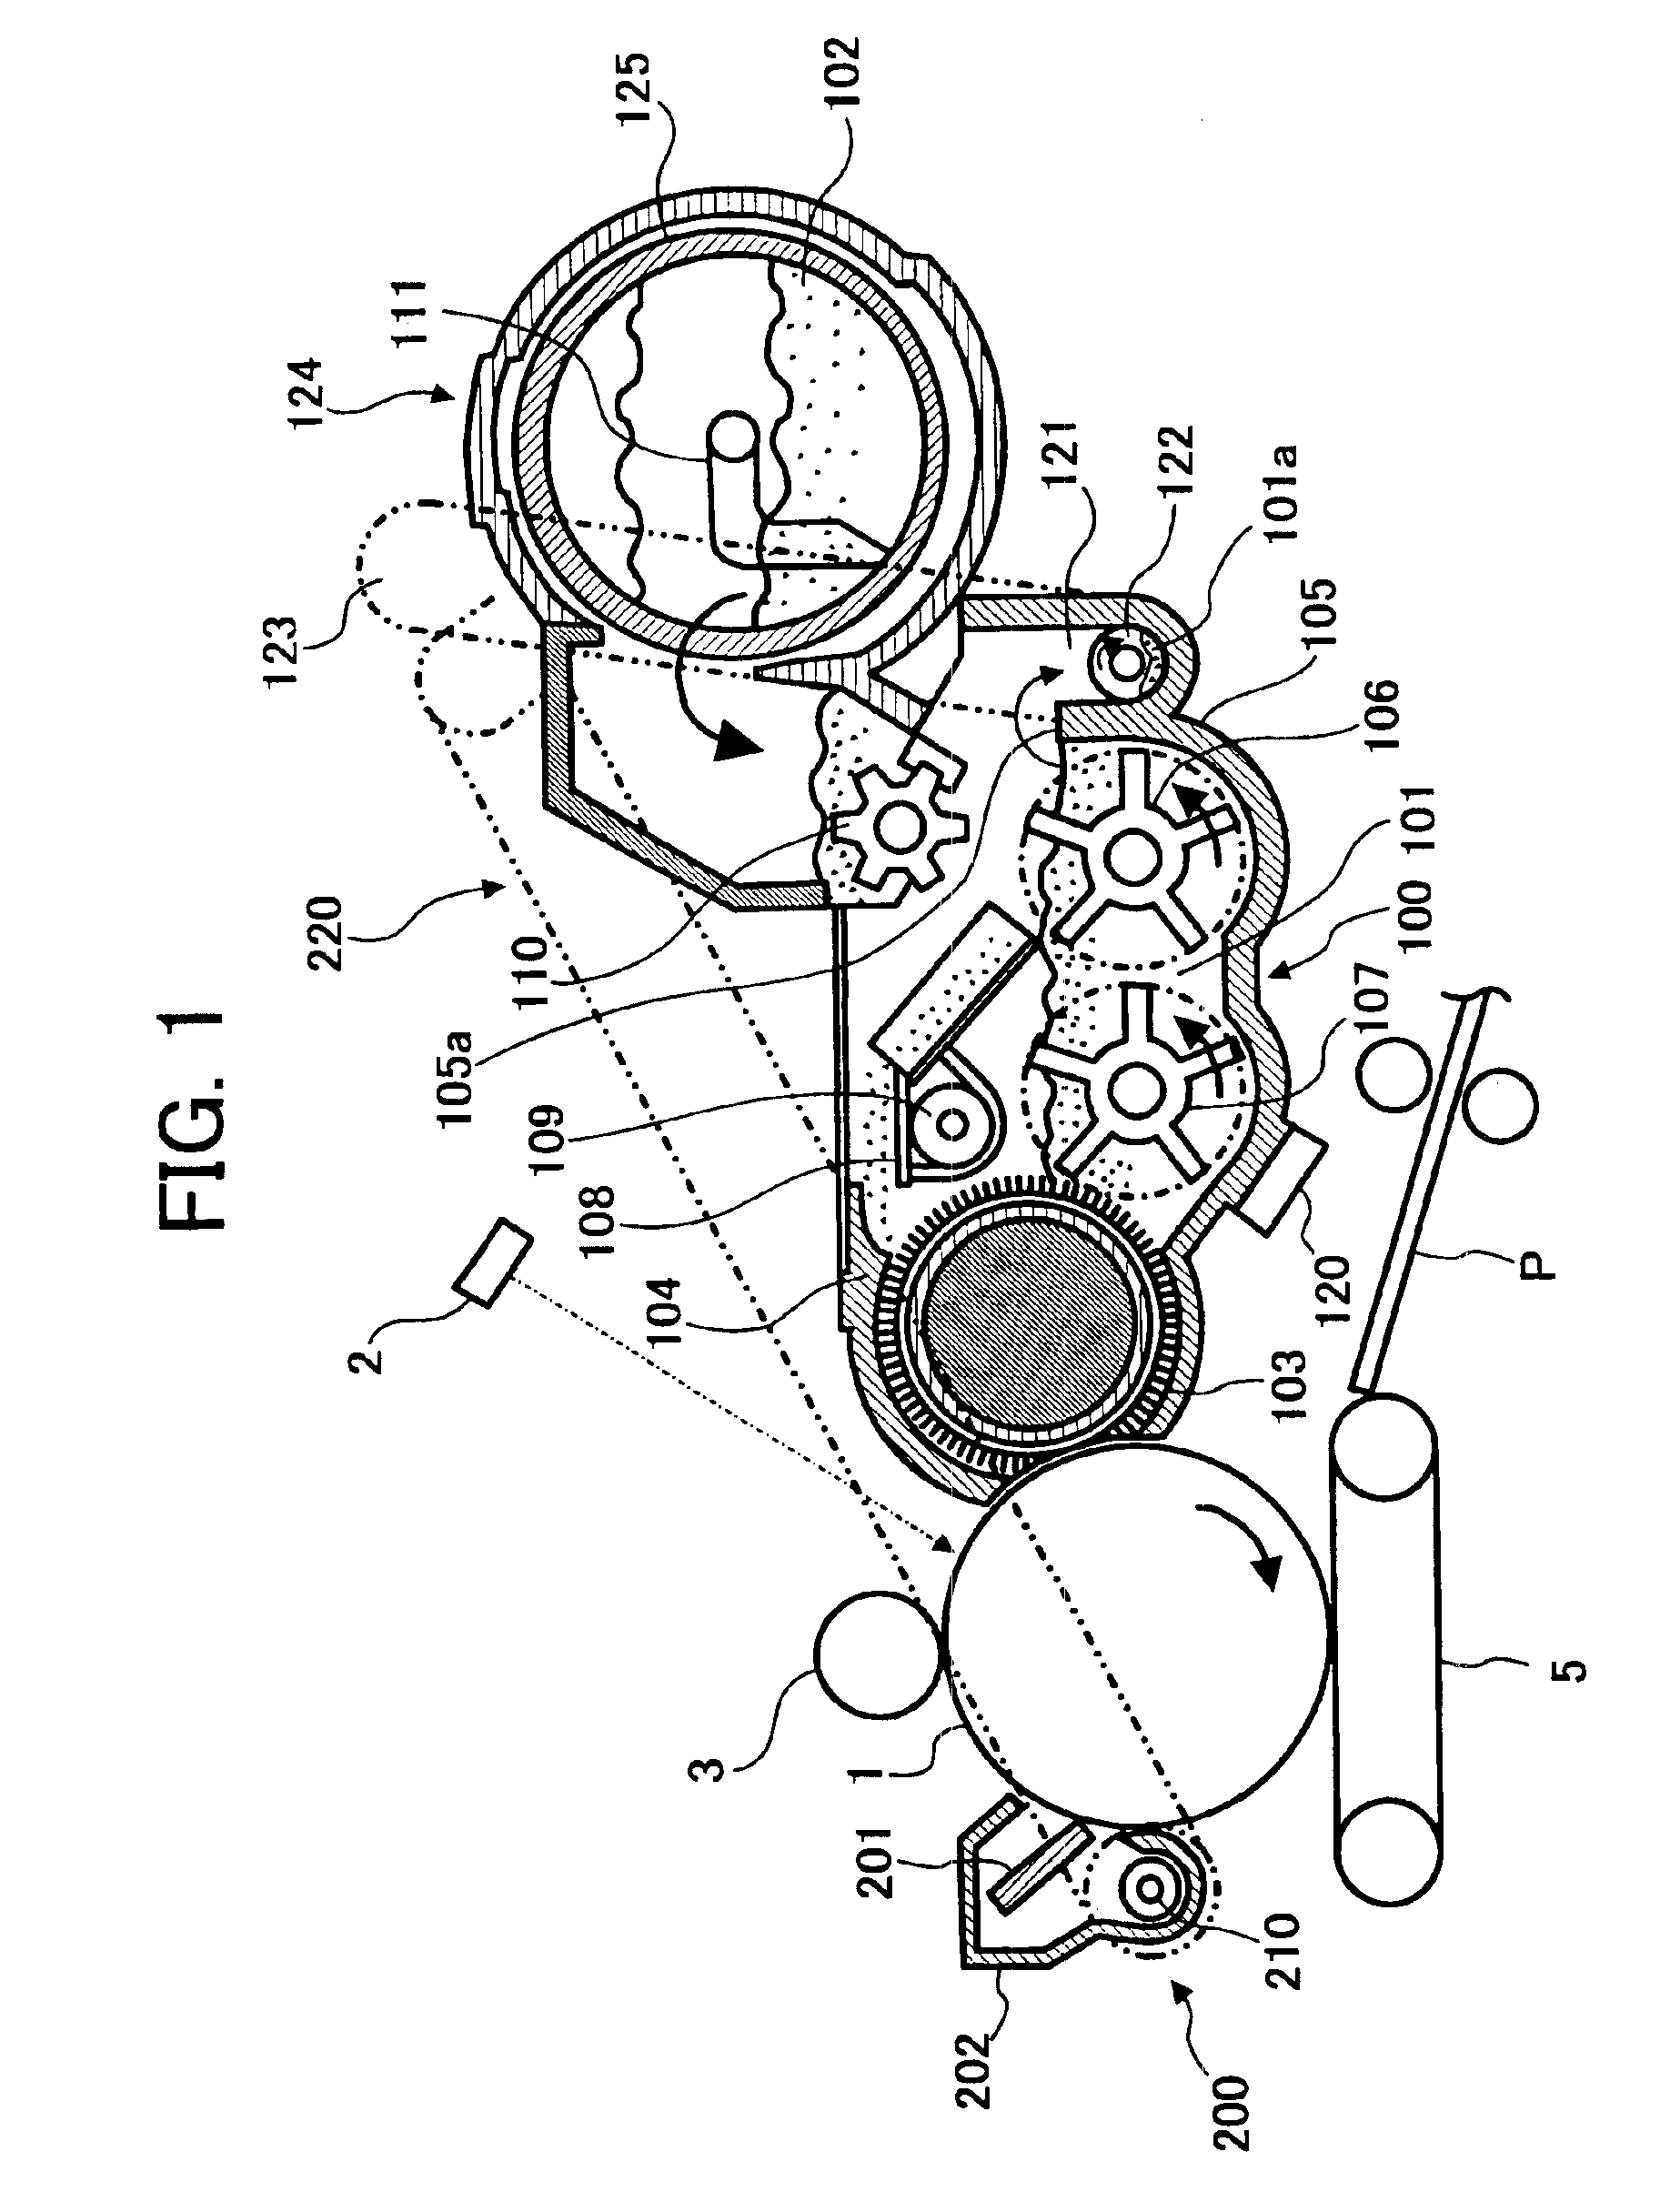 Image forming apparatus including developing device and developer containing device